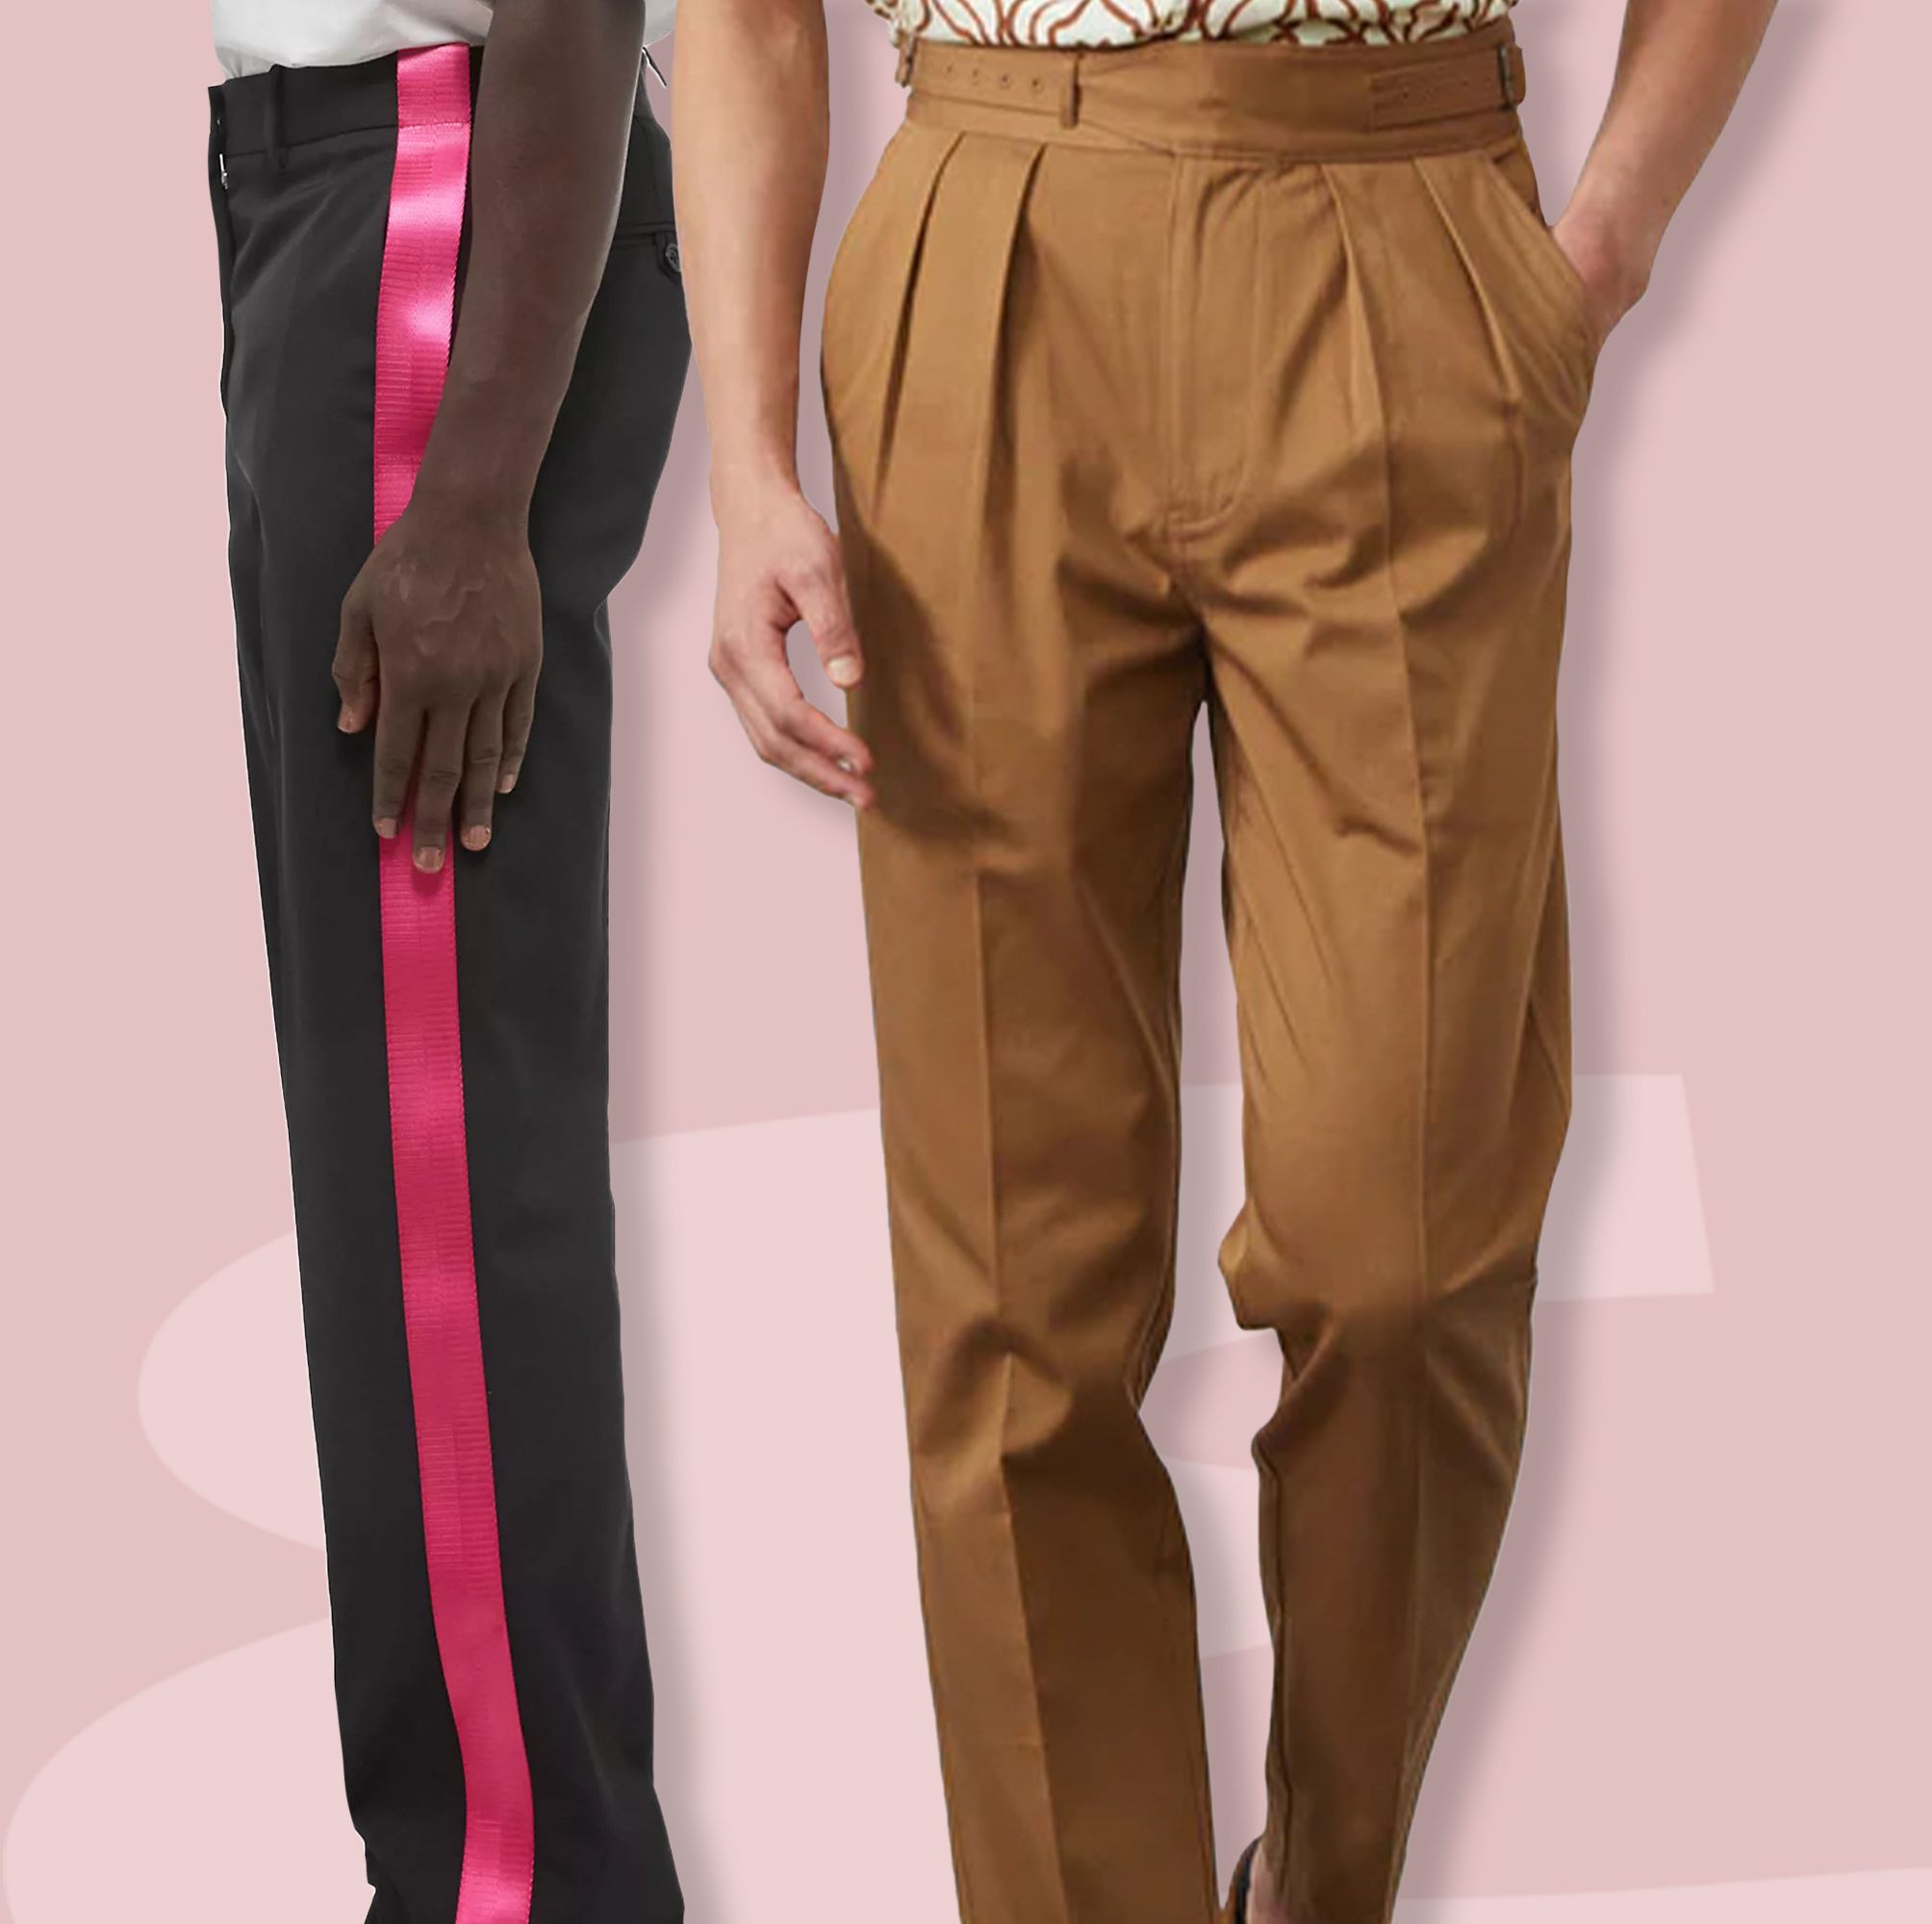 These High-Waisted Pants Look Great on Everyone